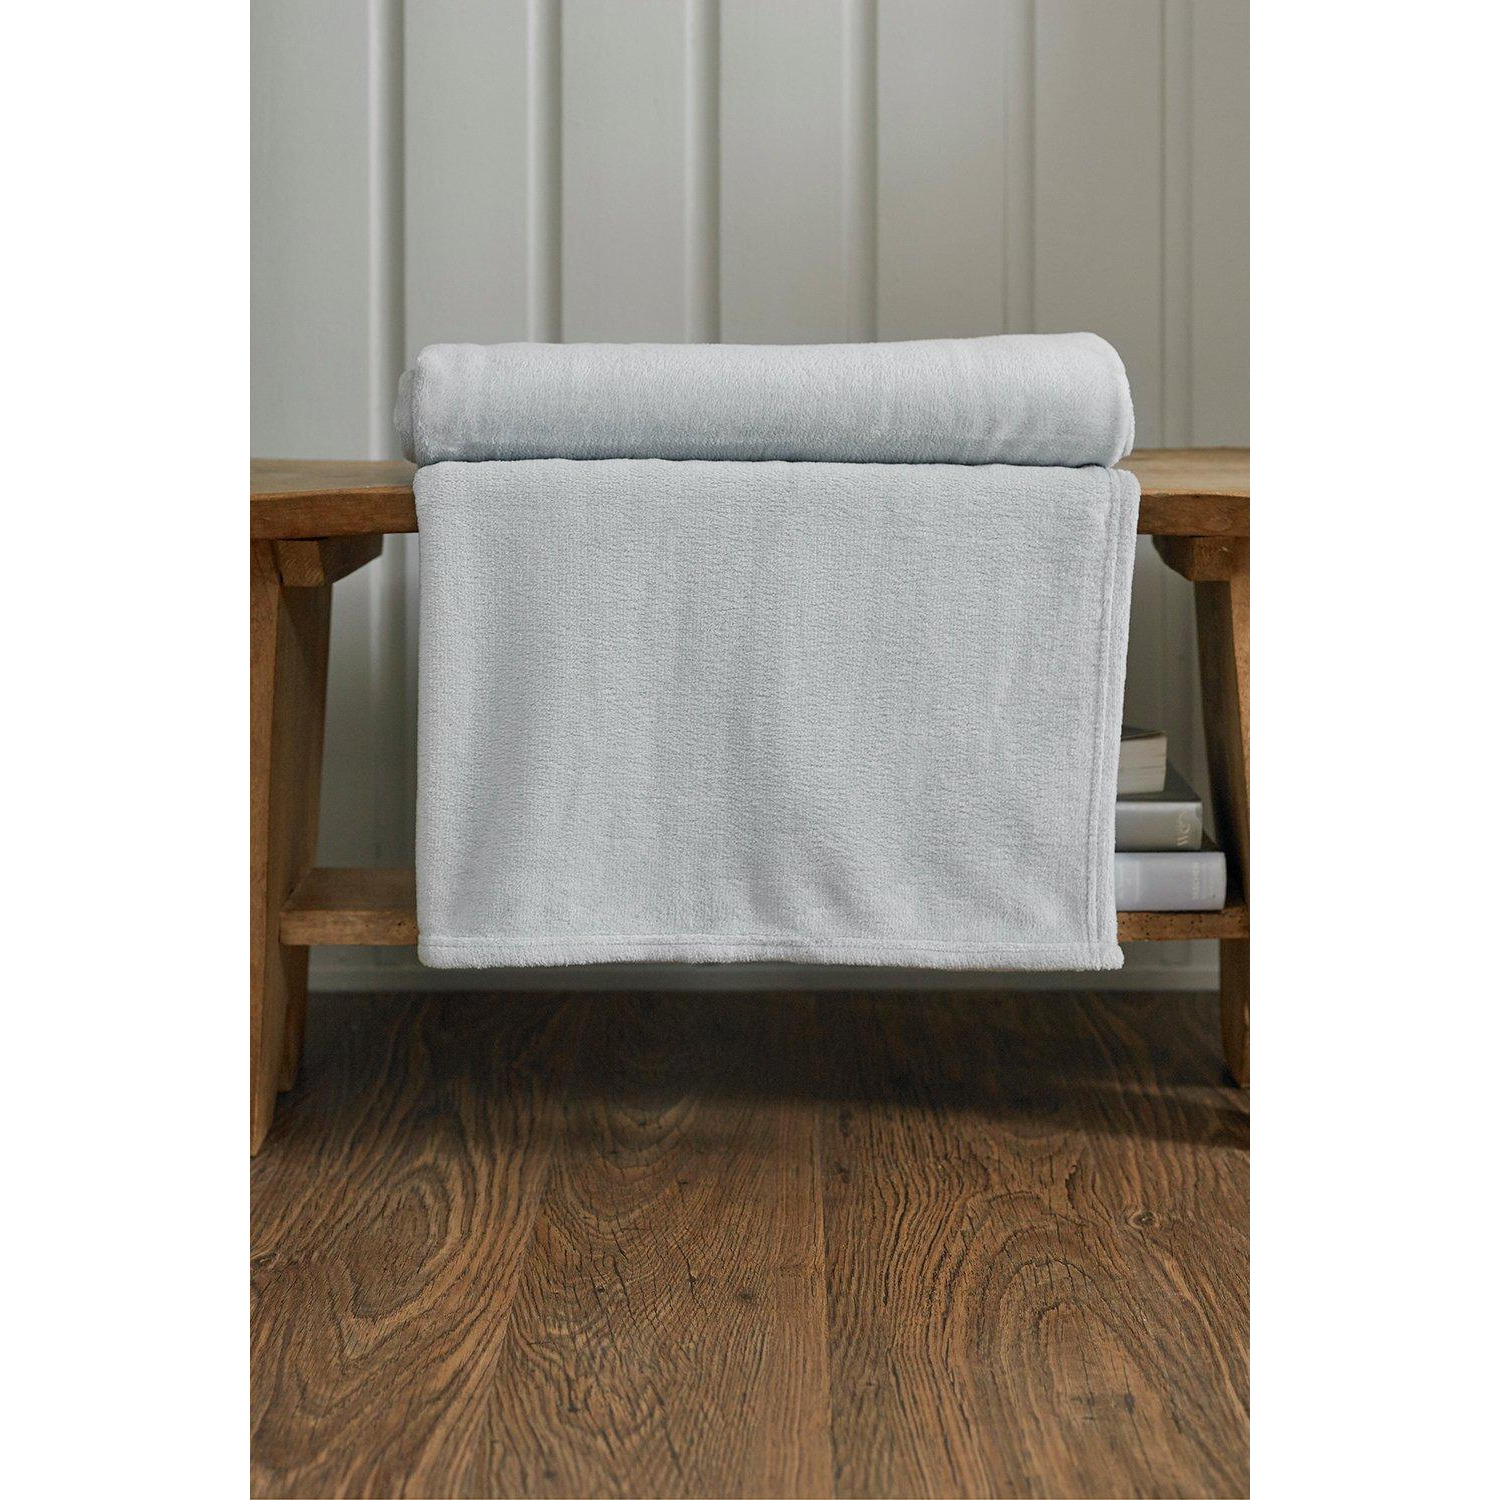 Snuggle Touch Microfibre Throws 140x180cm - image 1